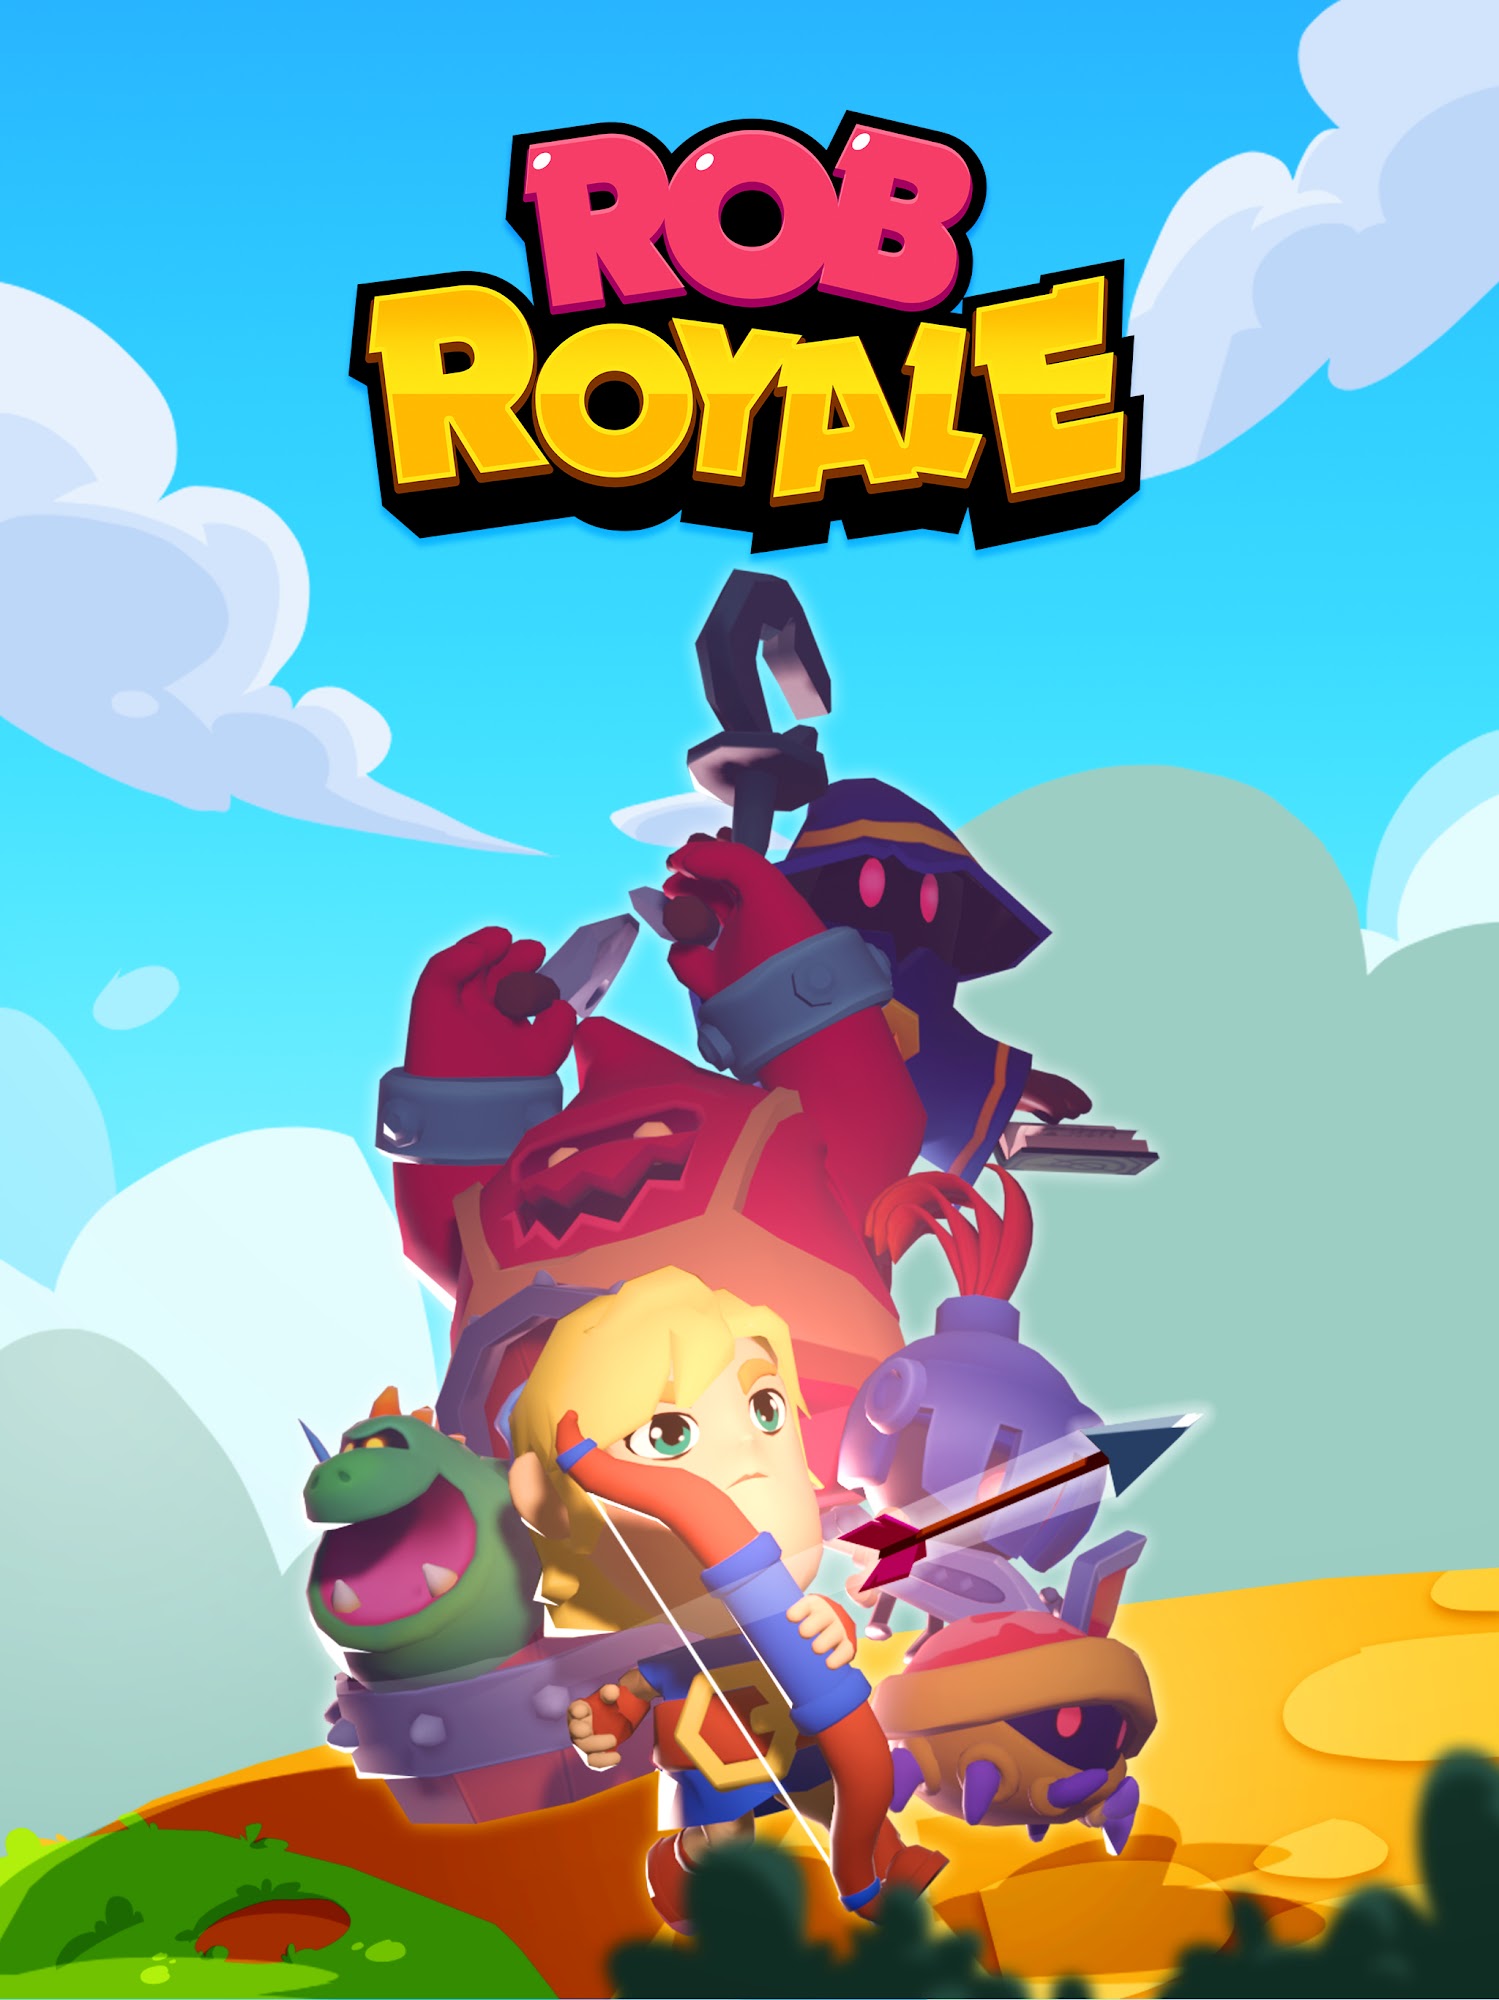 Full version of Android Fantasy game apk Rob Royale for tablet and phone.